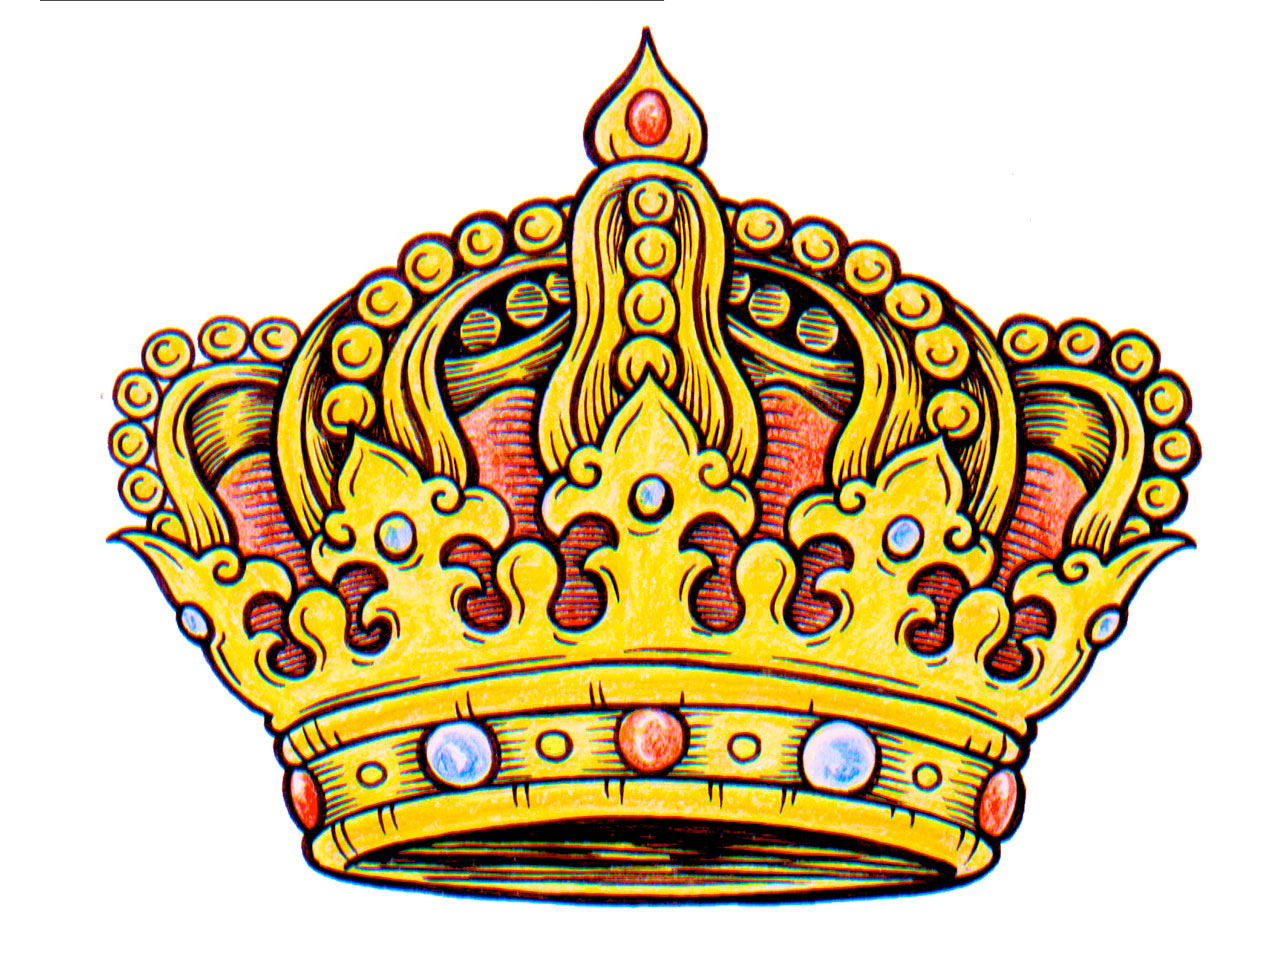 Gold crown king clipart